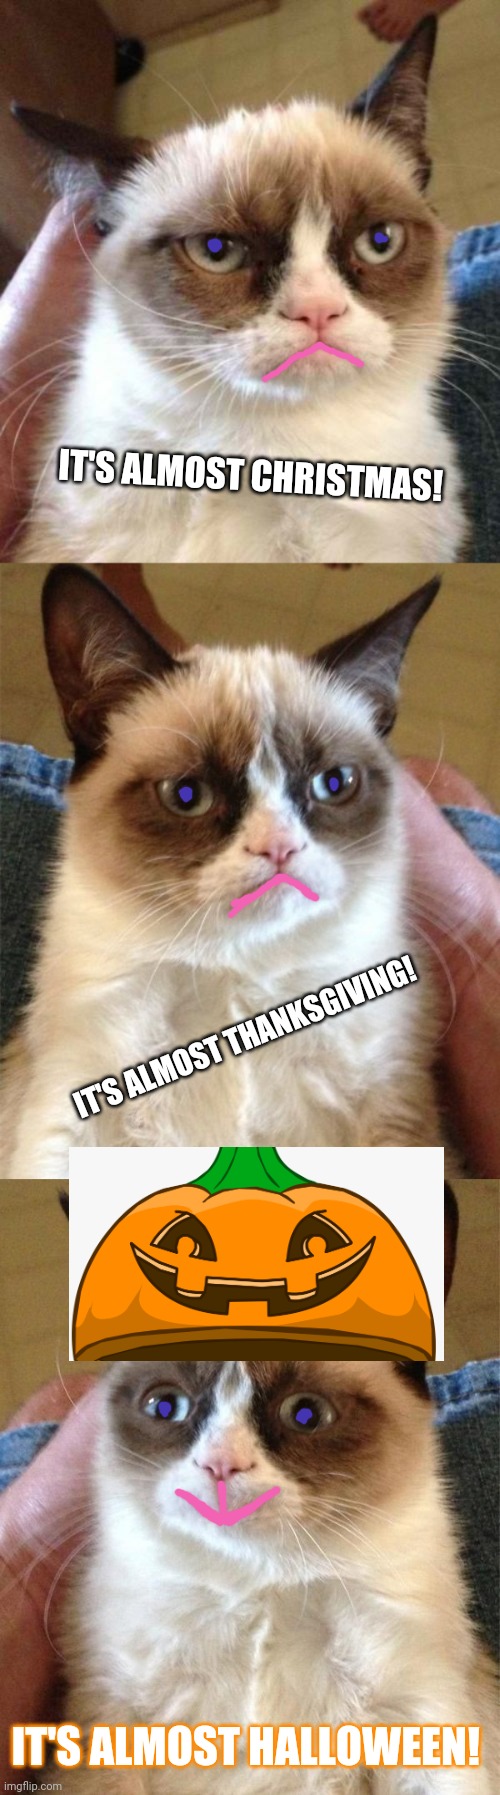 Grumpy cat hates most holidays | IT'S ALMOST CHRISTMAS! IT'S ALMOST THANKSGIVING! IT'S ALMOST HALLOWEEN! | image tagged in memes,grumpy cat reverse,grumpy cat,grumpy cat happy | made w/ Imgflip meme maker